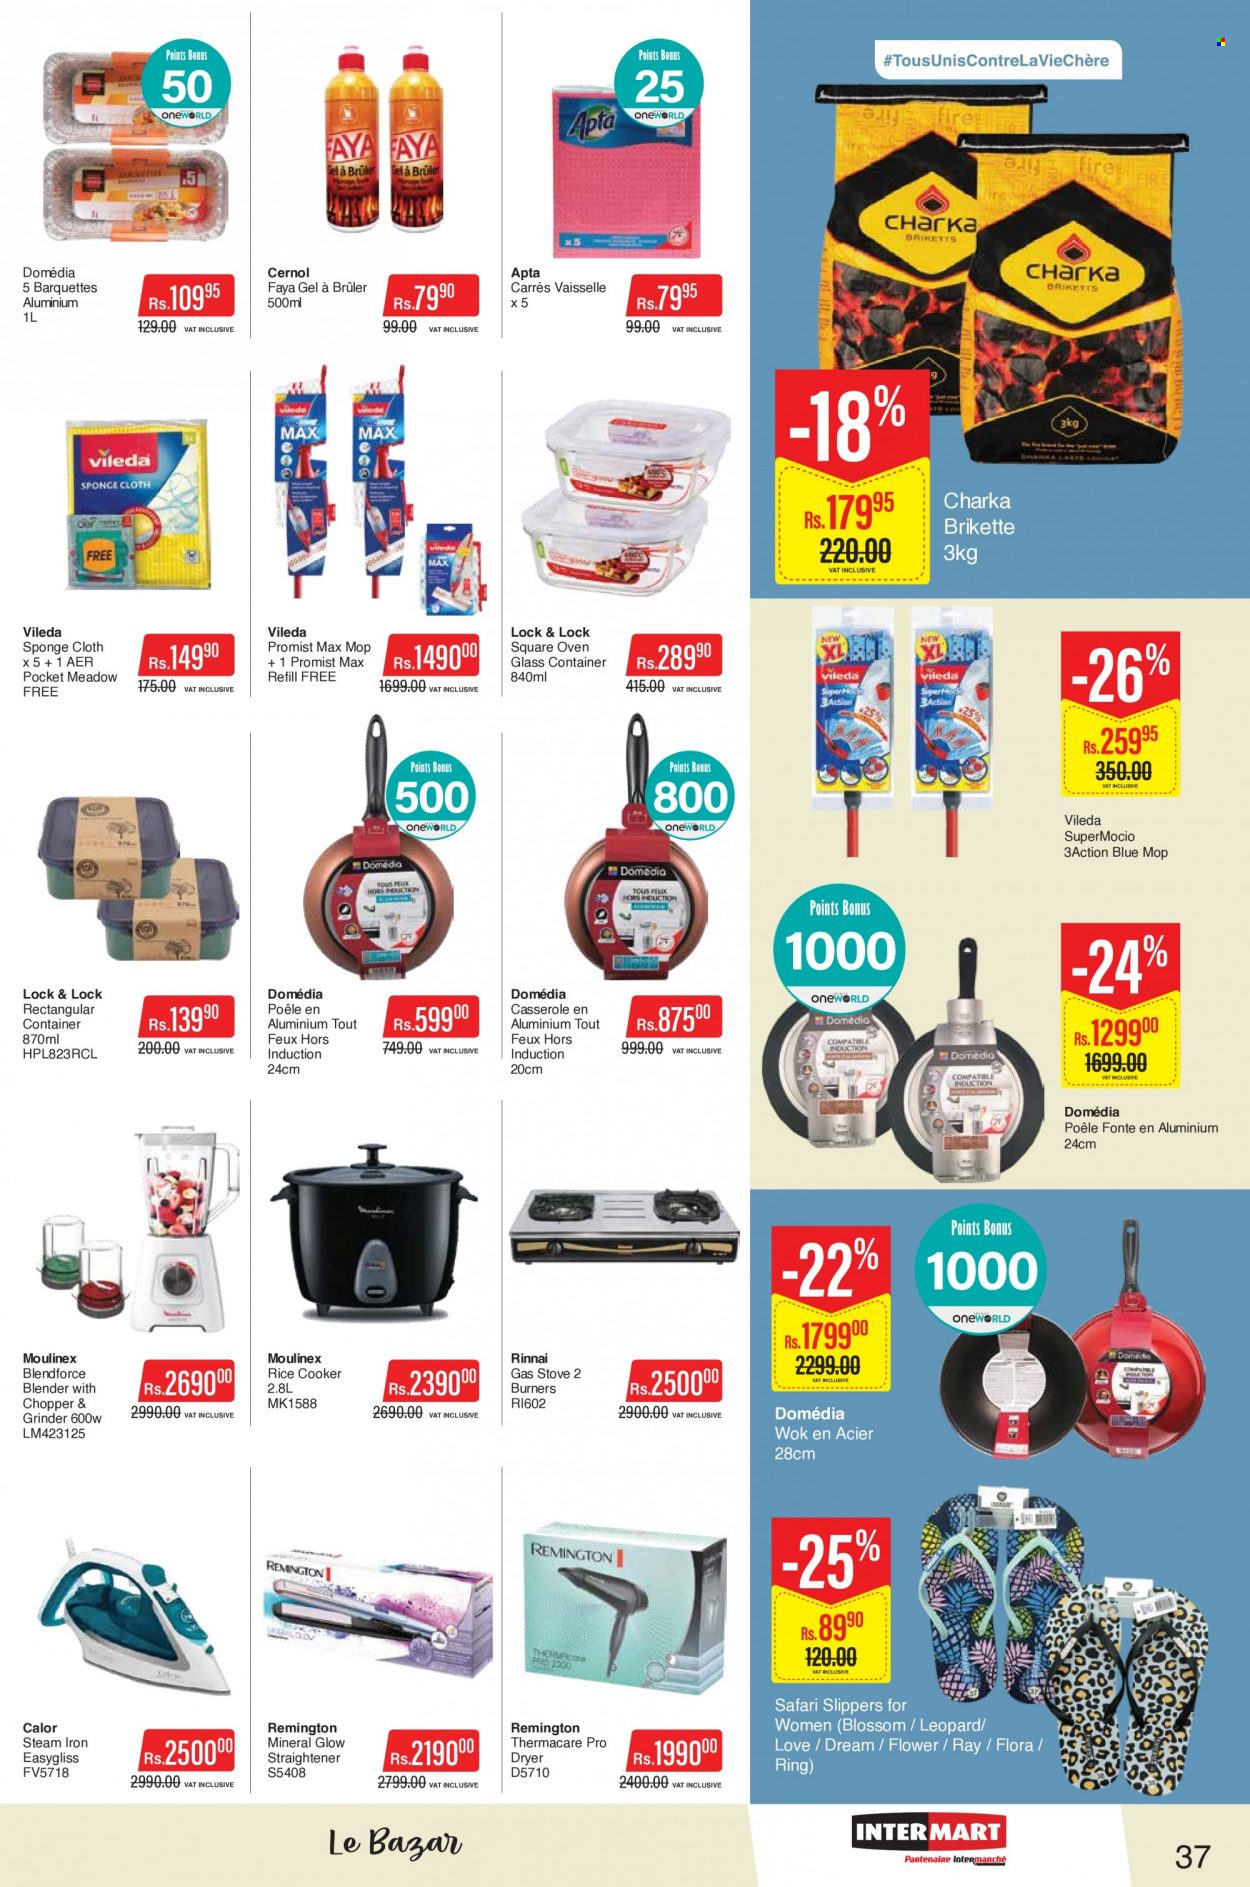 thumbnail - Intermart Catalogue - 23.11.2022 - 20.12.2022 - Sales products - Flora, Blossom, Vileda, sponge, mop, wok, casserole, rice cooker, handy chopper, container, Moulinex, iron, steam iron, grinder, straightener, slippers, Thermacare, blender, Remington. Page 37.